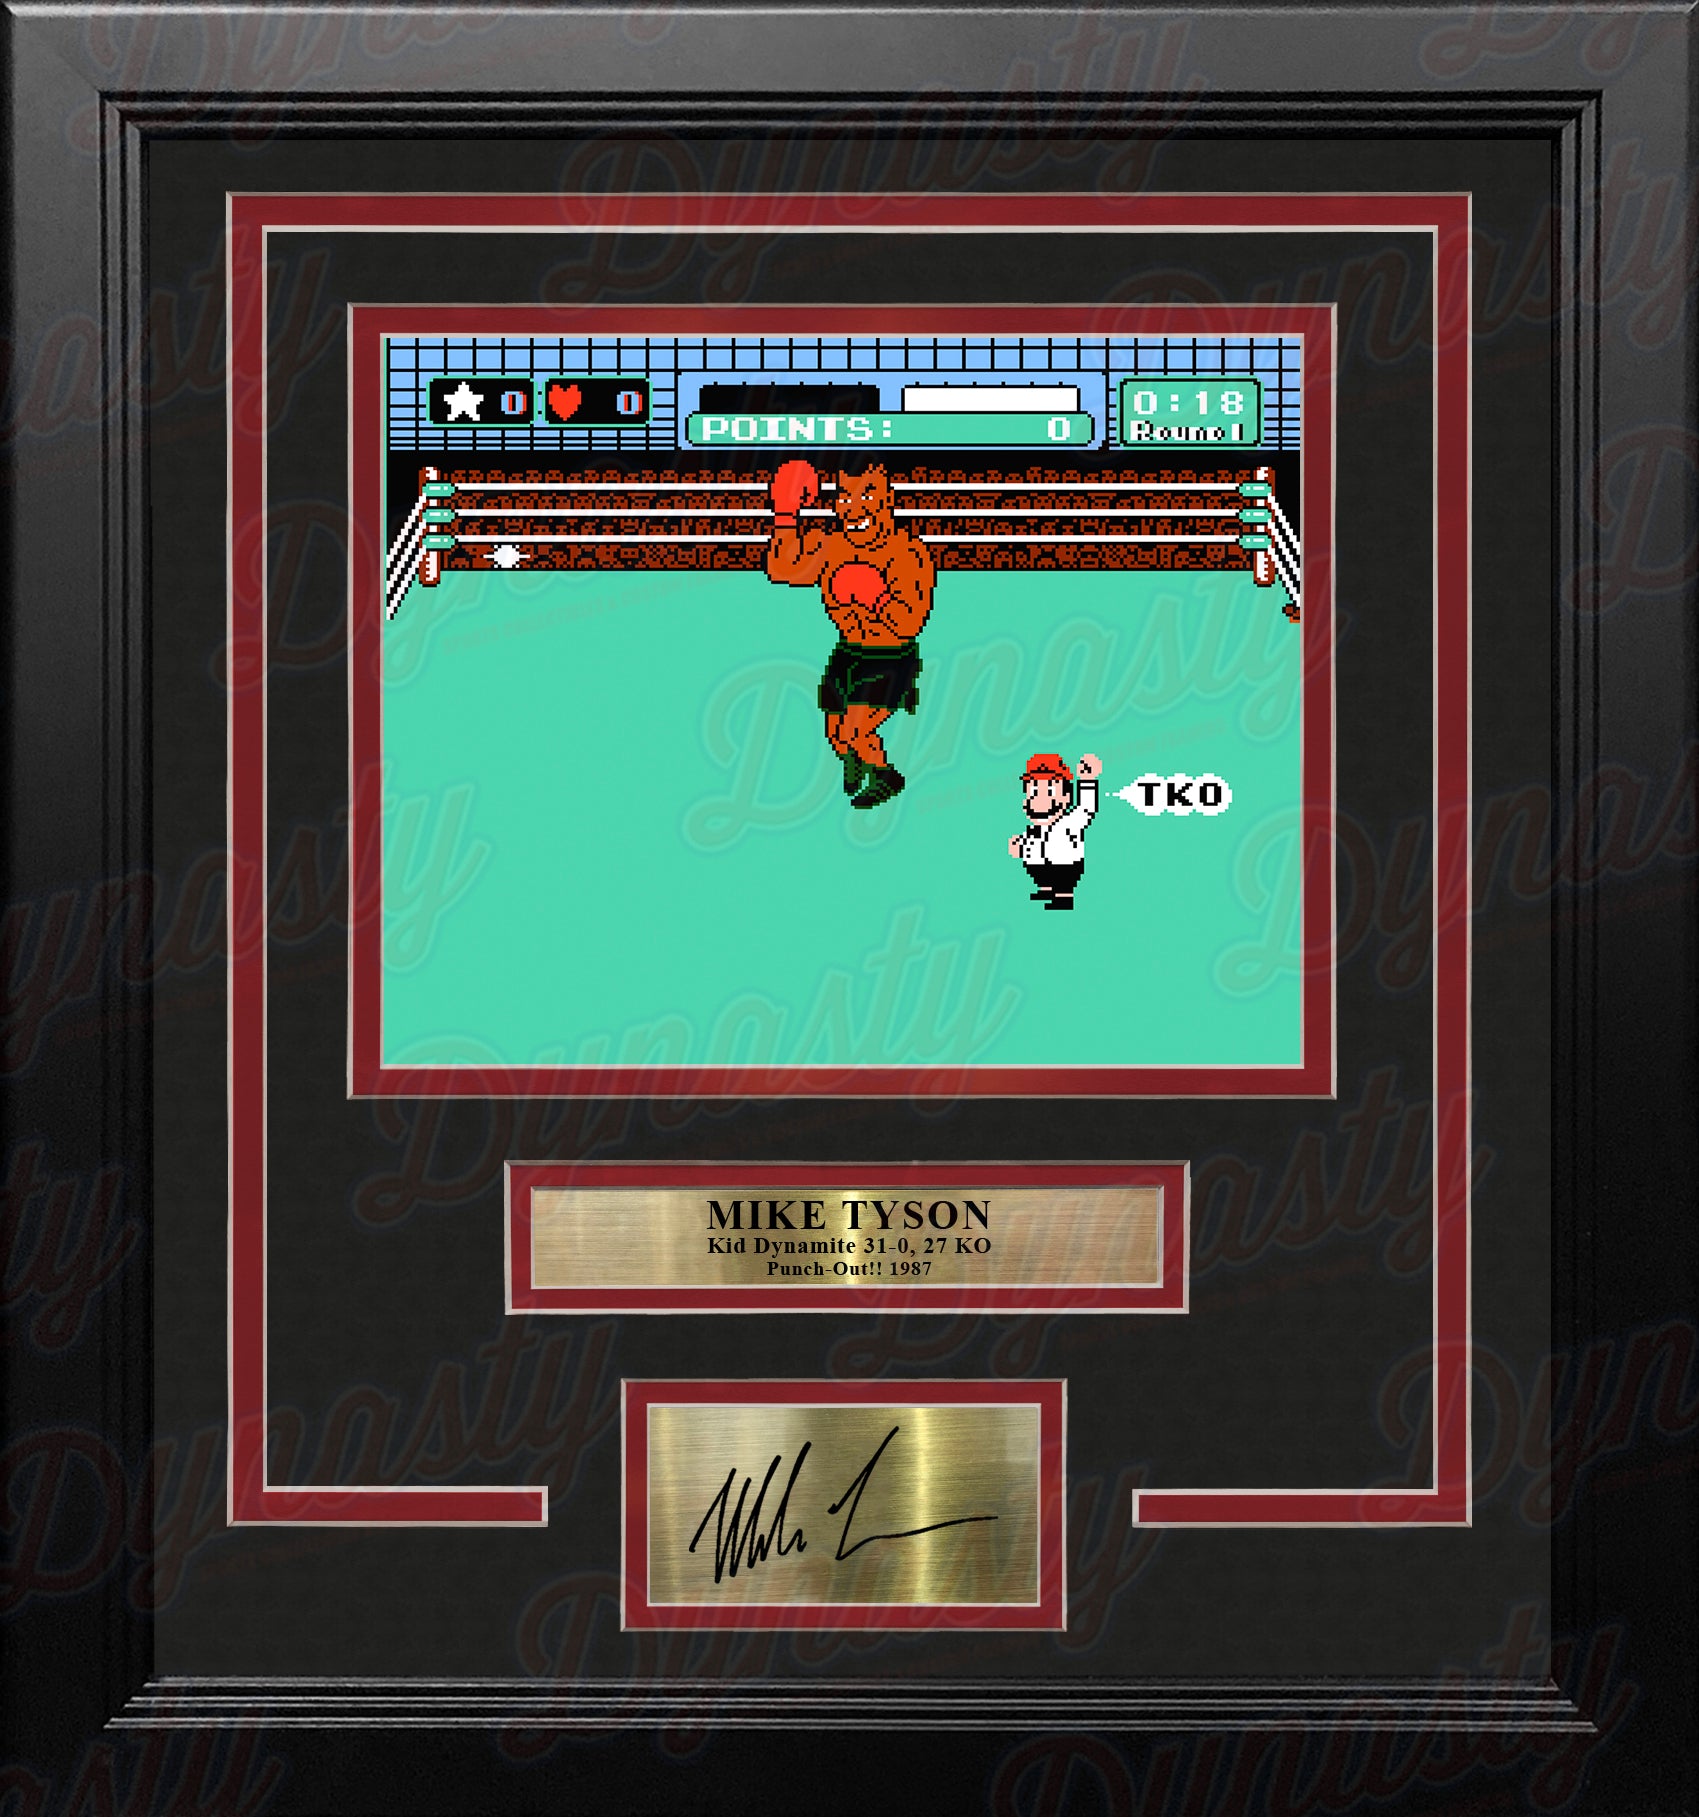 Mike Tyson Punch-Out!! 8" x 10" Framed Video Game Boxing Photo with Engraved Autograph - Dynasty Sports & Framing 